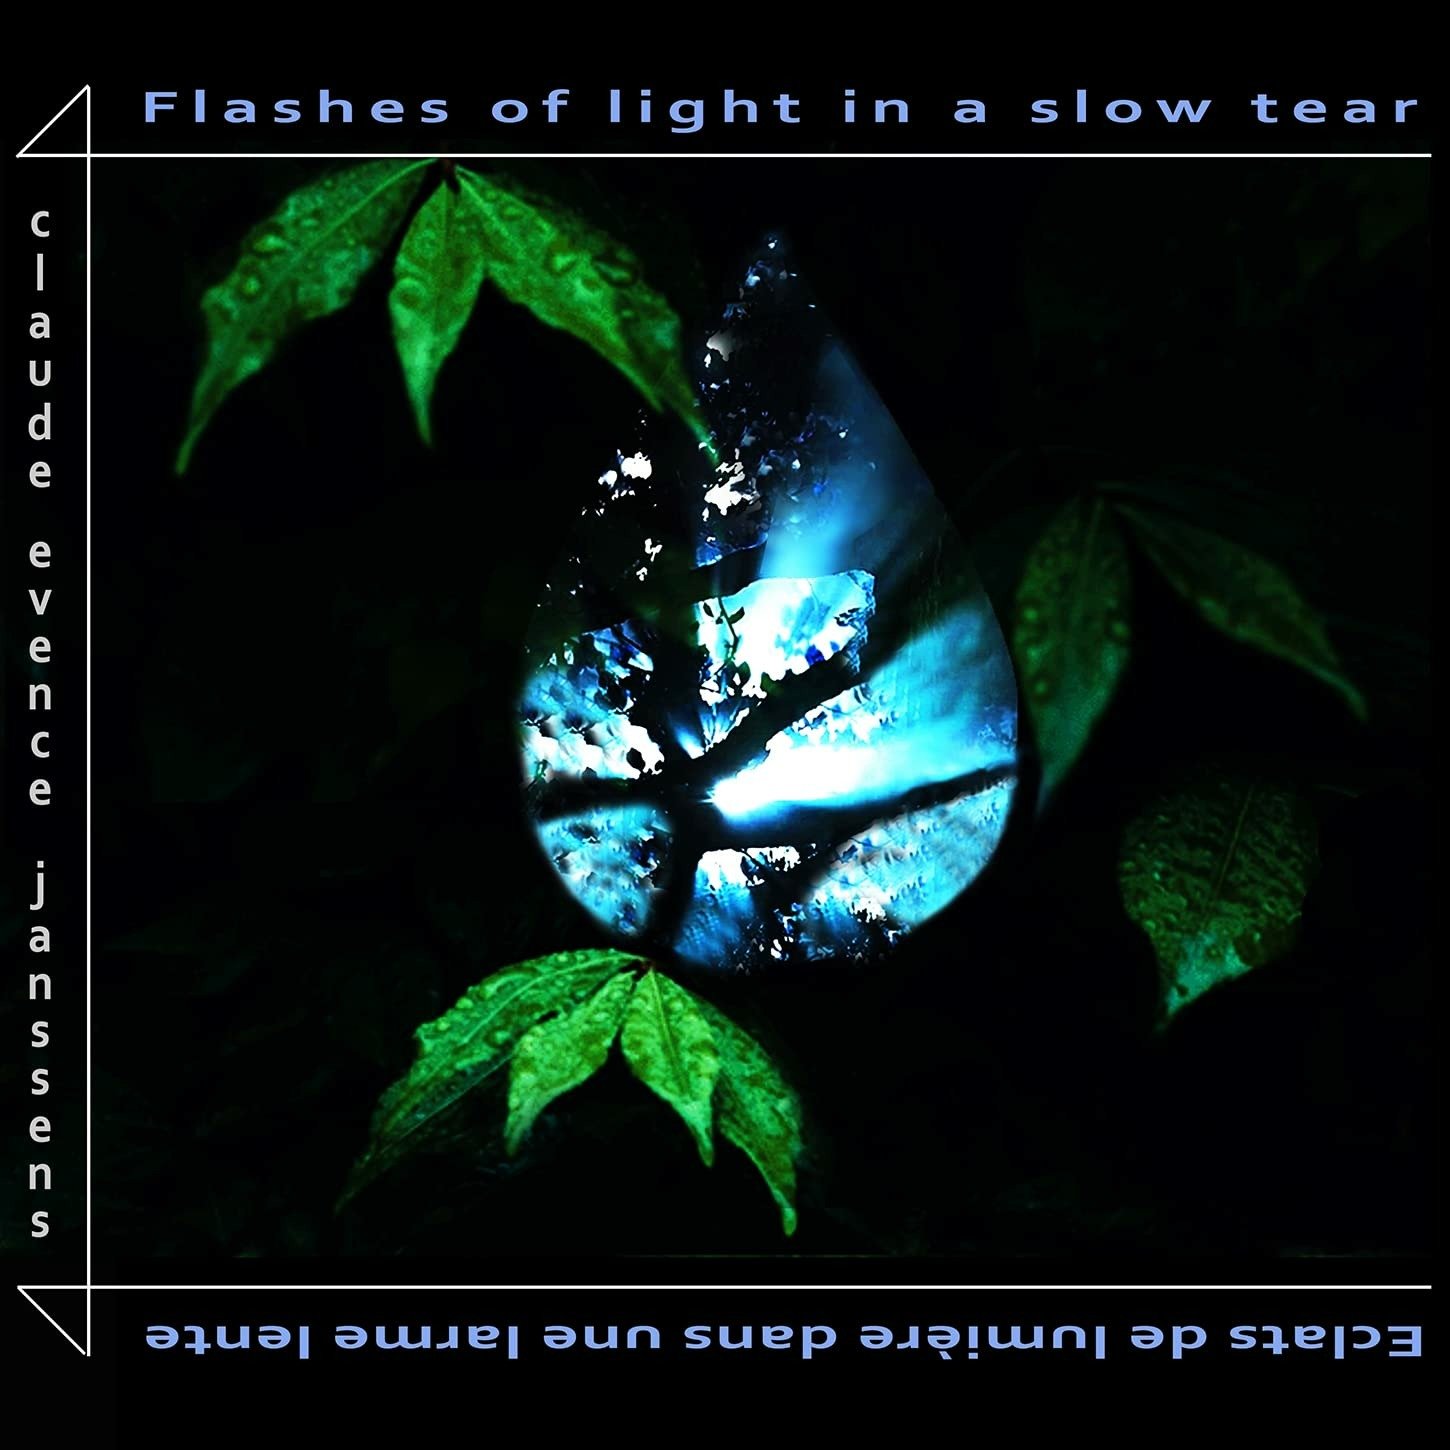 CD Shop - JANSSENS, CLAUDE EVENCE FLASHES OF LIGHT IN A SLOW TEAR